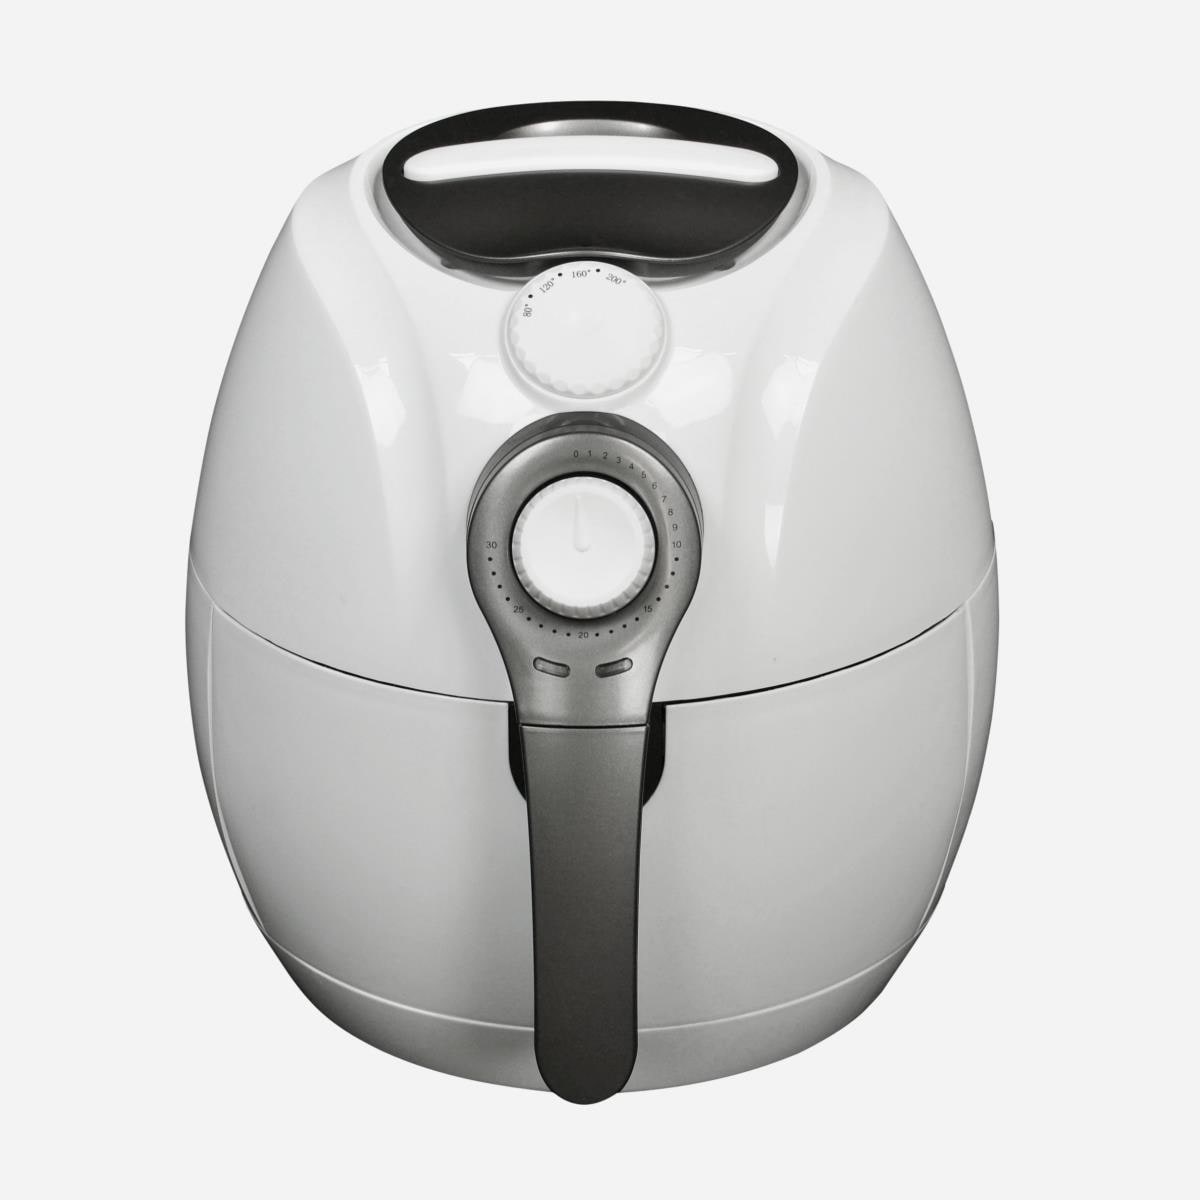 https://ak1.ostkcdn.com/images/products/26300177/Avalon-Bay-Air-Fryer-For-Healthy-Fried-Food-3.7-Quart-Capacity-Includes-Airfryer-Baking-Set-and-Recipe-Book-AB-Airfryer100W-0db39192-2df3-4bfb-a942-0882bf69ce13.jpg